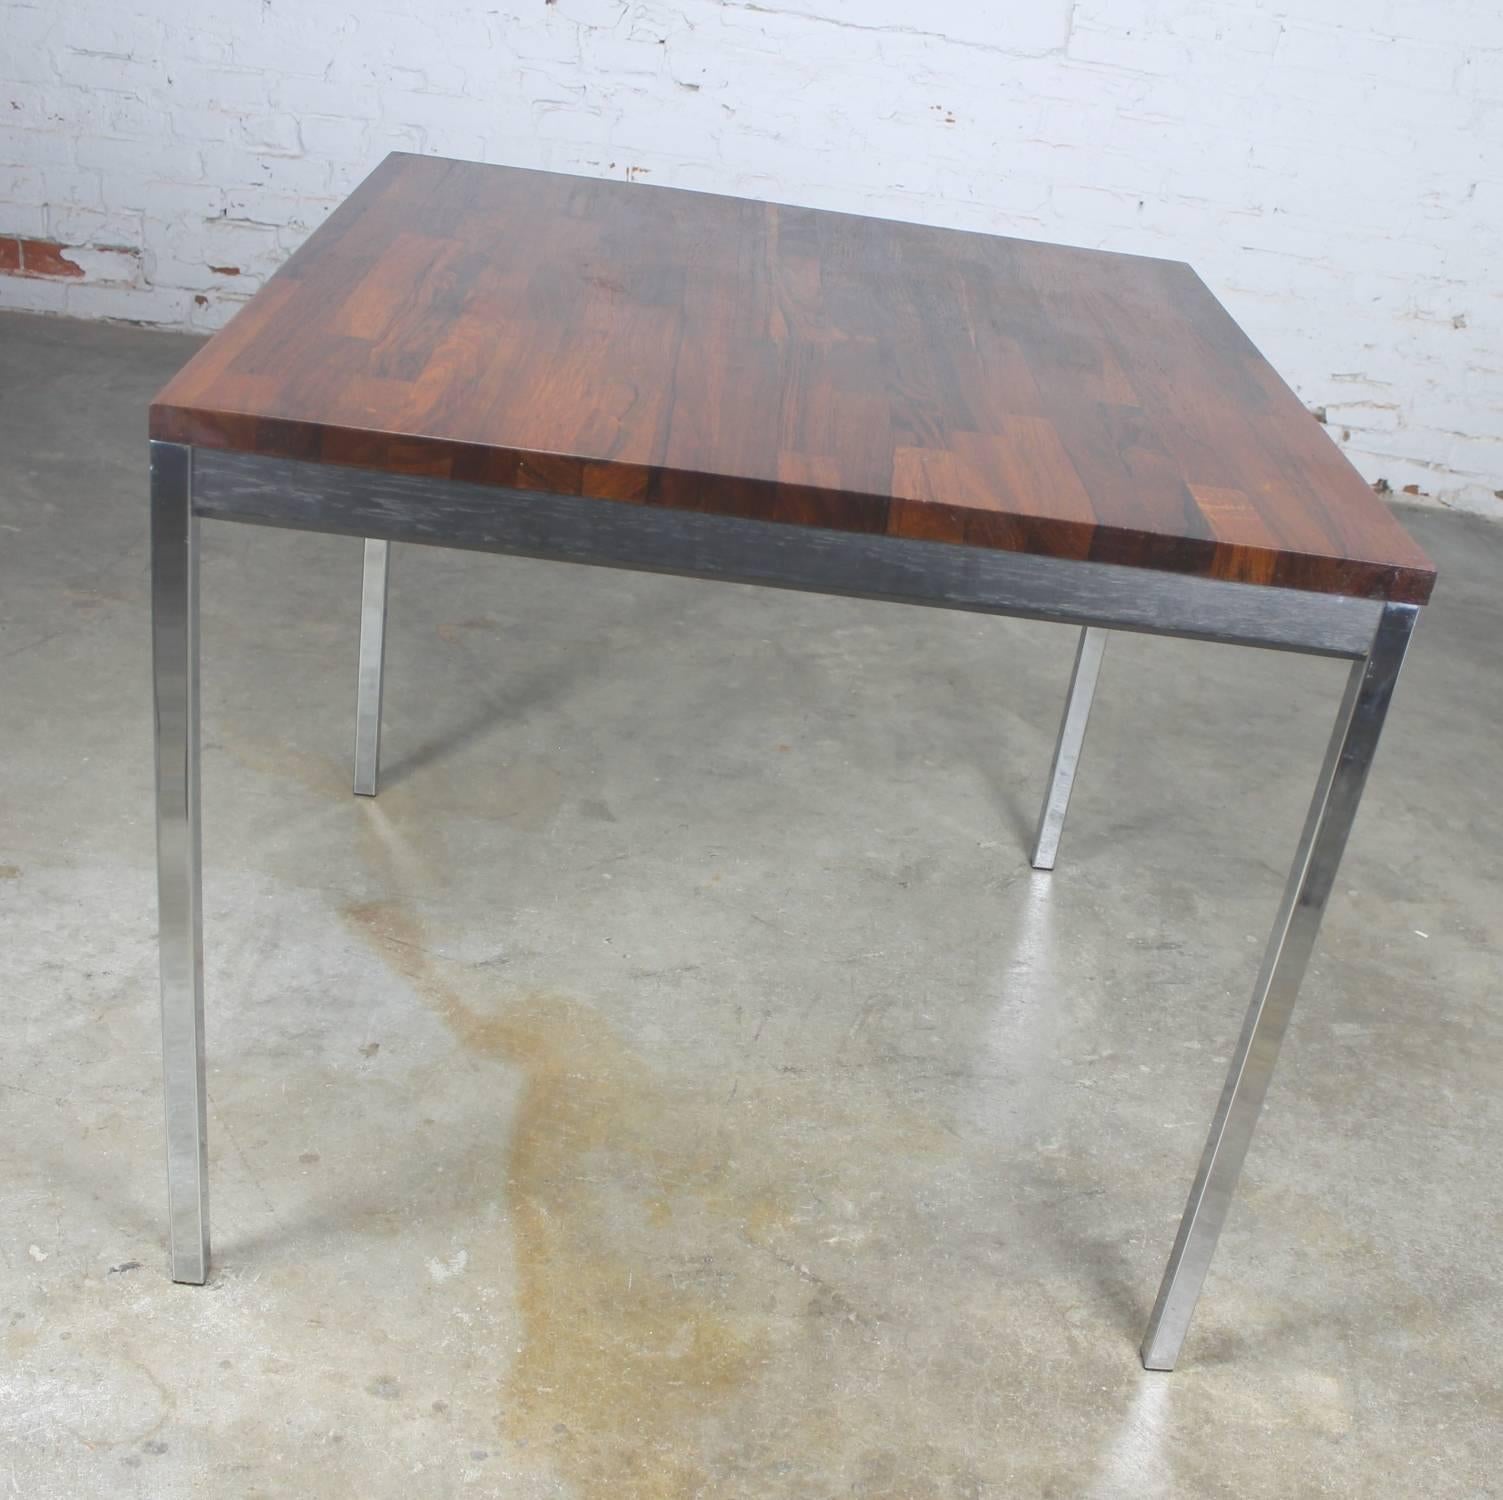 Outstanding vintage Mid-Century Modern square card table in the style of Milo Baughman or Knoll with chrome legs, staved rosewood top, and ebonized wood apron. It is in incredible vintage condition circa 1970.

This oh so handsome table is a feast